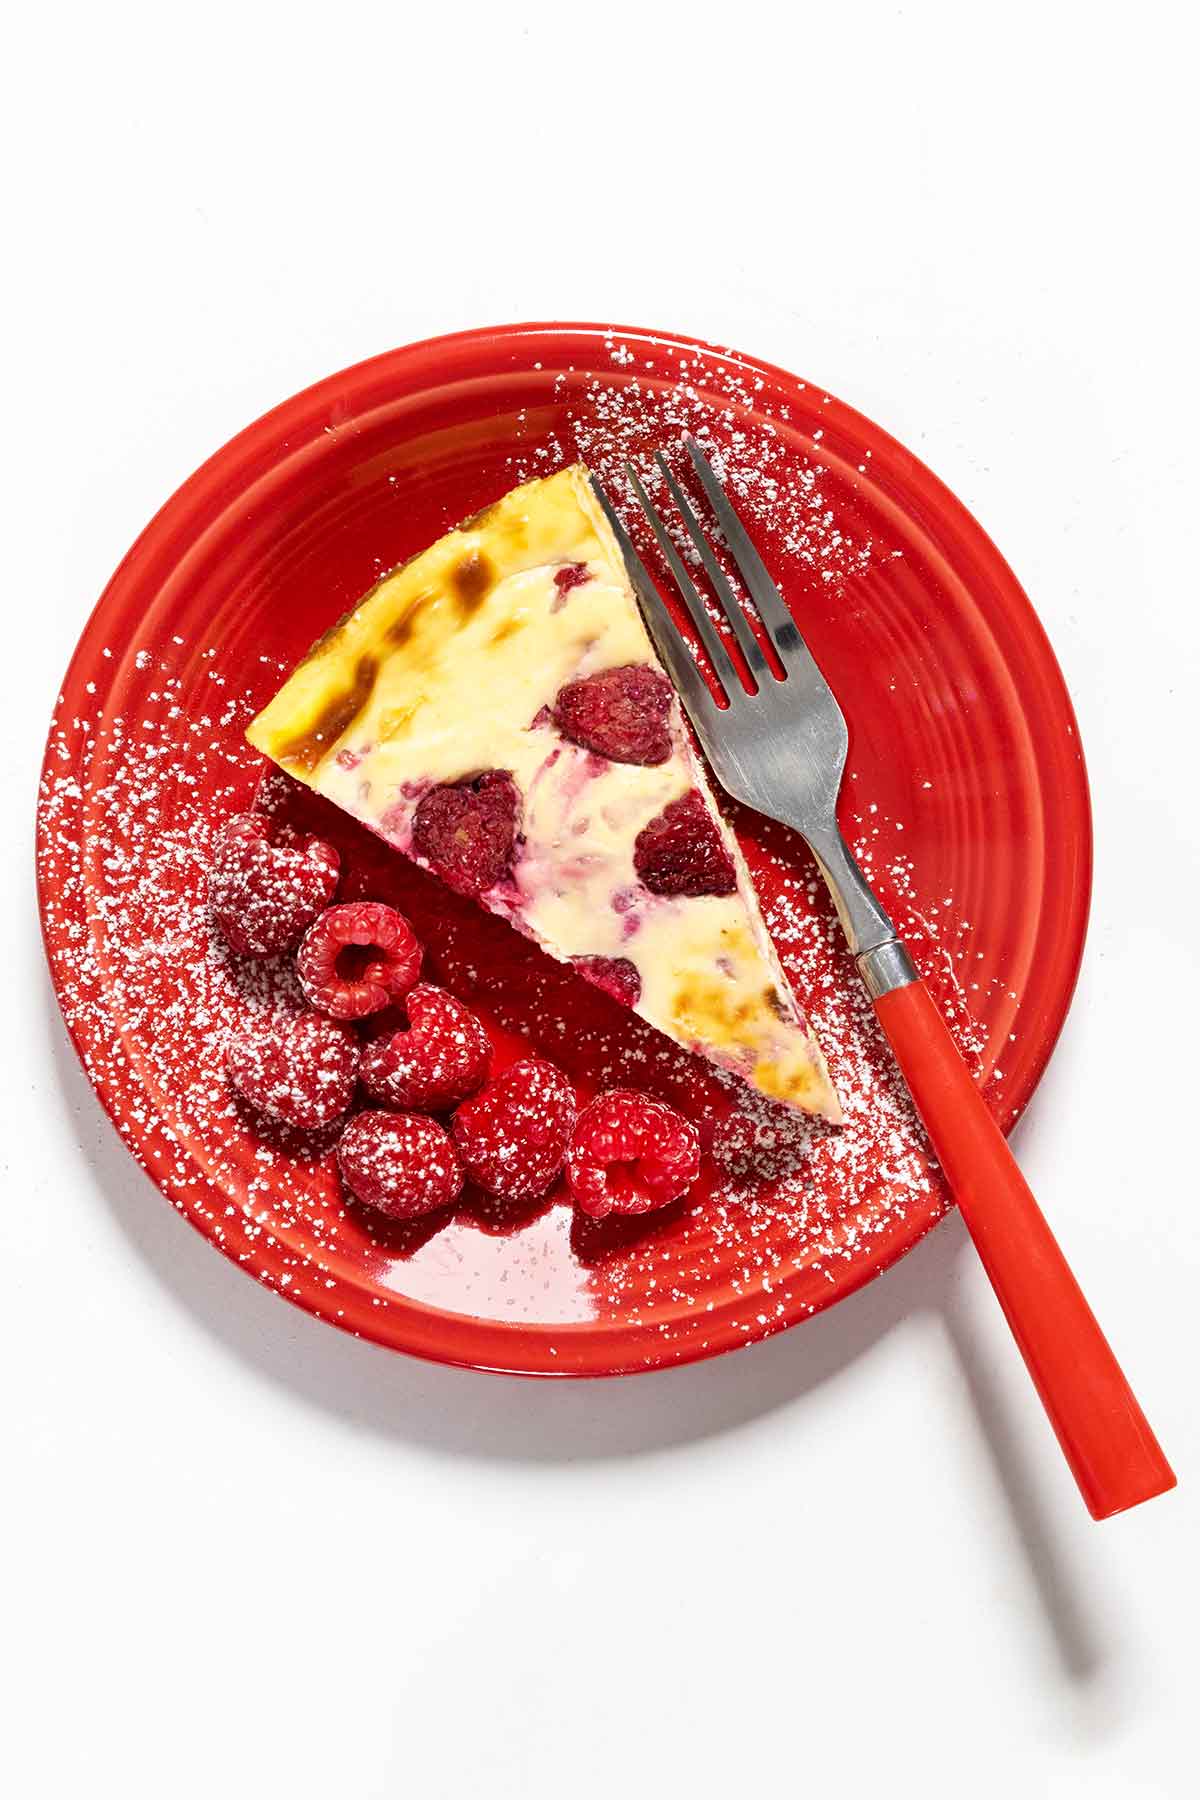 A slice of lemon raspberry cheesecake dusted with confectioners' sugar on a red plate with a fork and seven raspberries on the side.